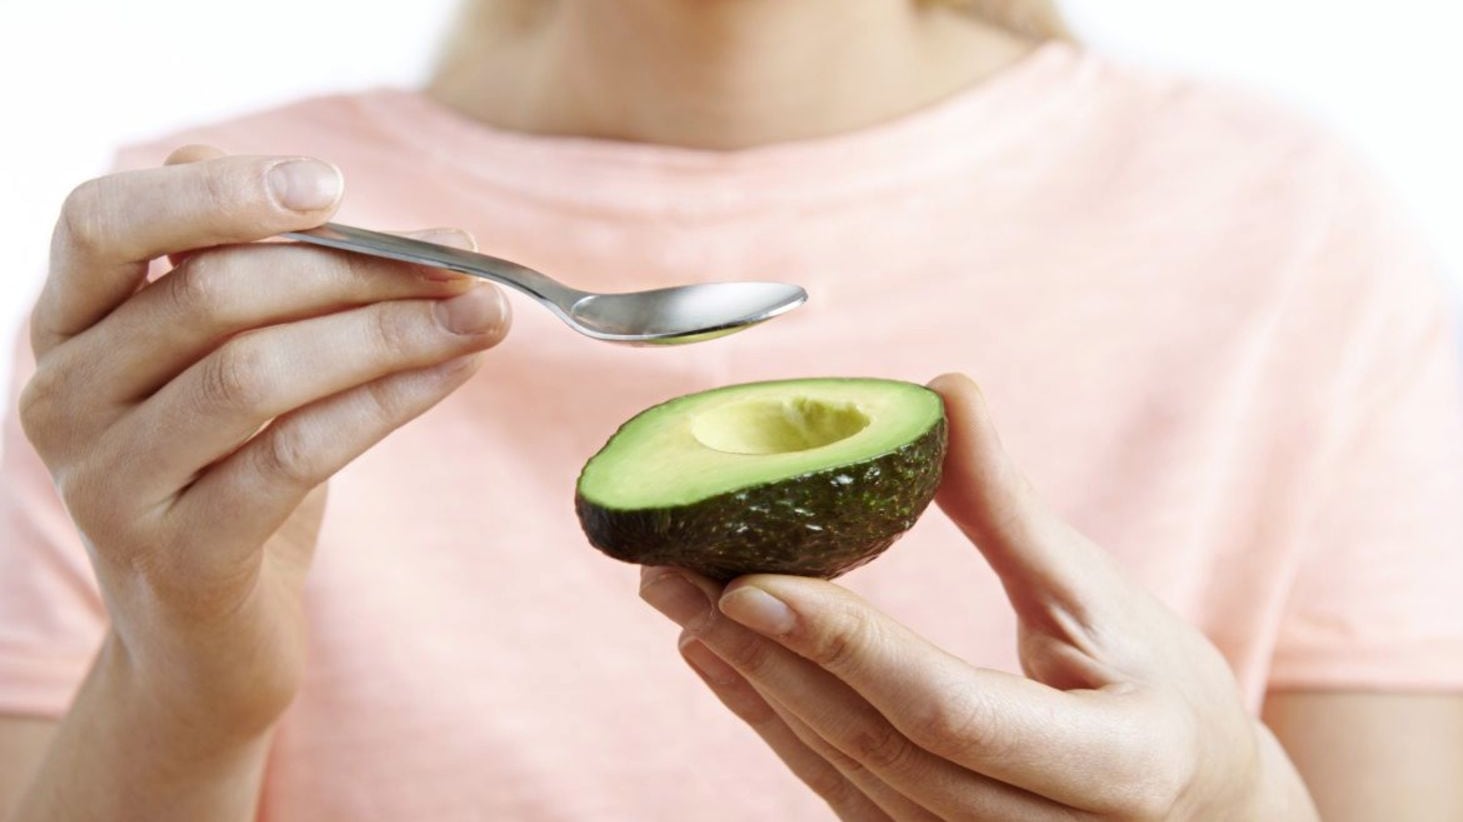 Eating avocado will have no effect against the coronavirus 